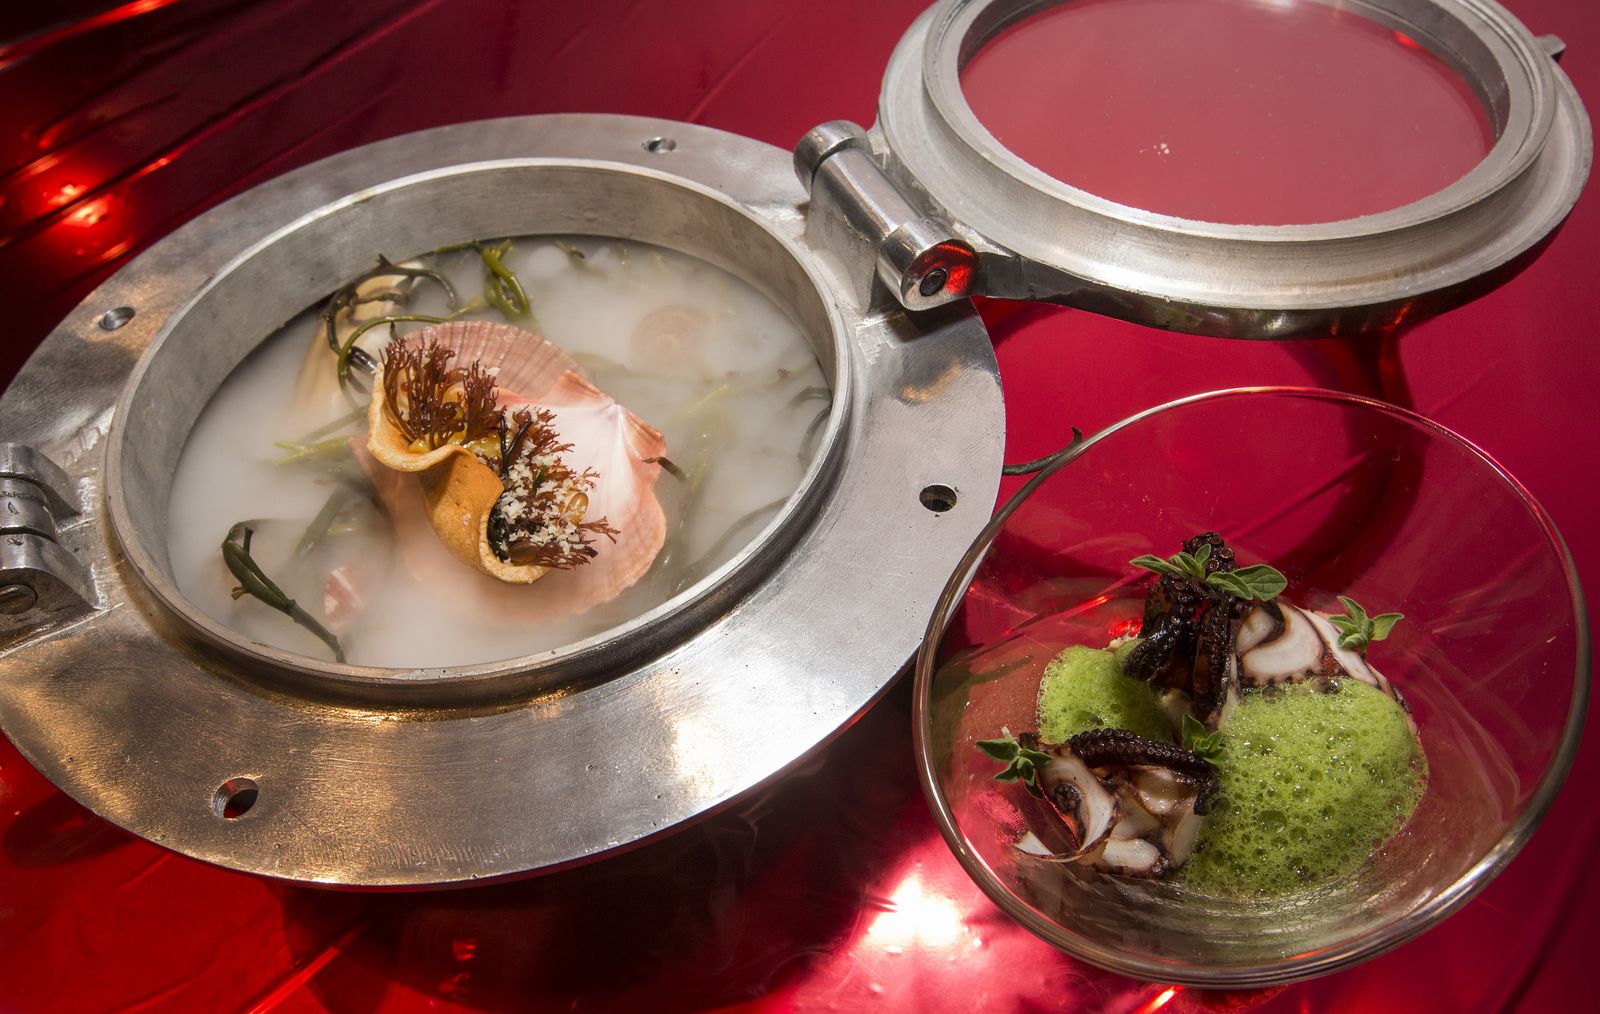 A metallic portal-shaped bowl holds a scallop dish with dry ice beside a glass bowl of octopus and green foam.